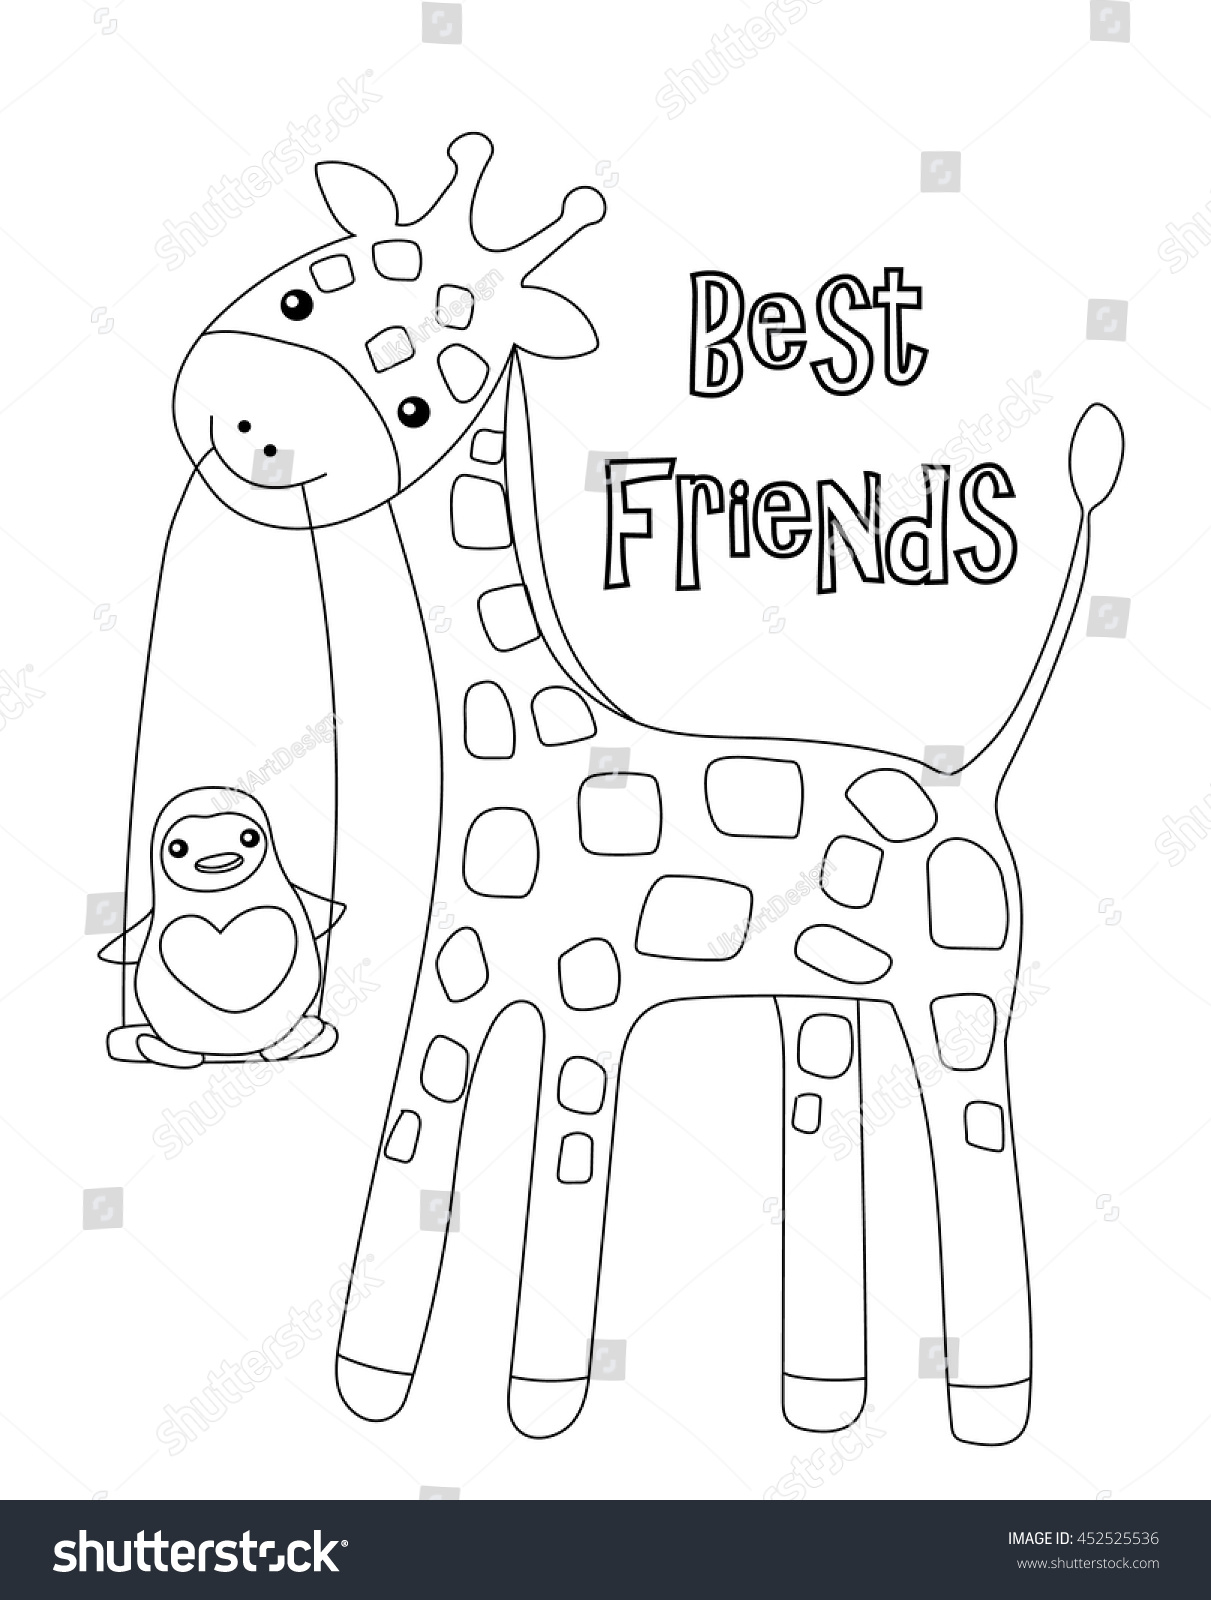 Coloring Page Little Cute Giraffe His Stock Vector Royalty Free ...